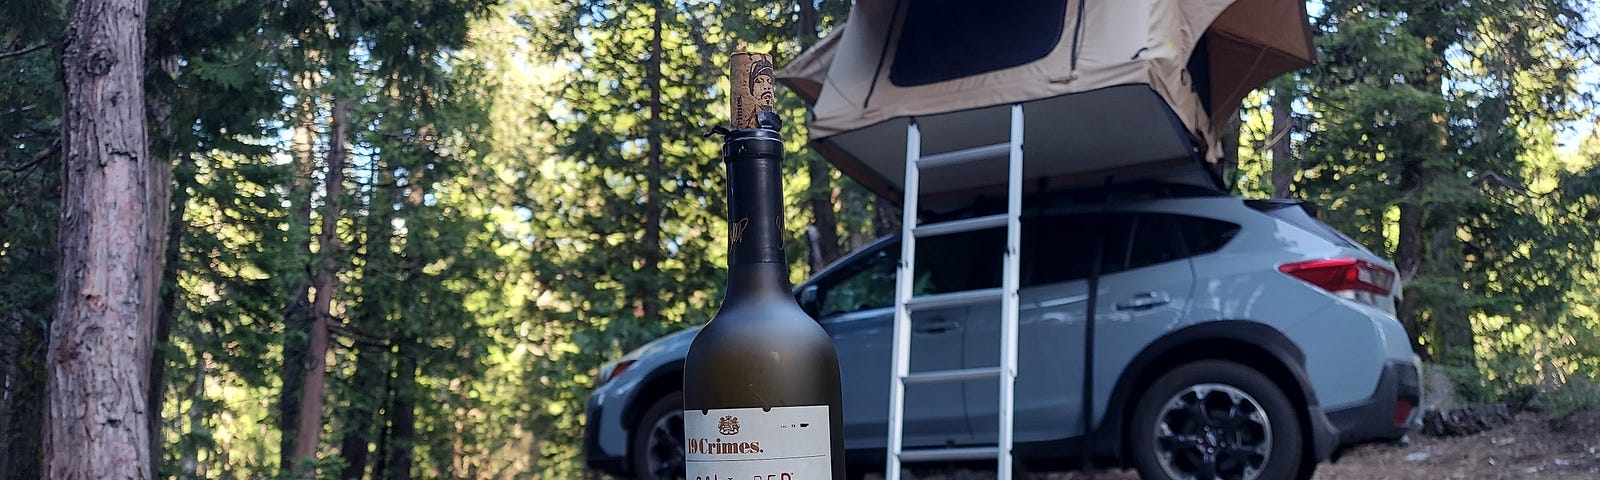 Our rooftop tent with a bottle of Snoop’s red wine sitting on a table in front.